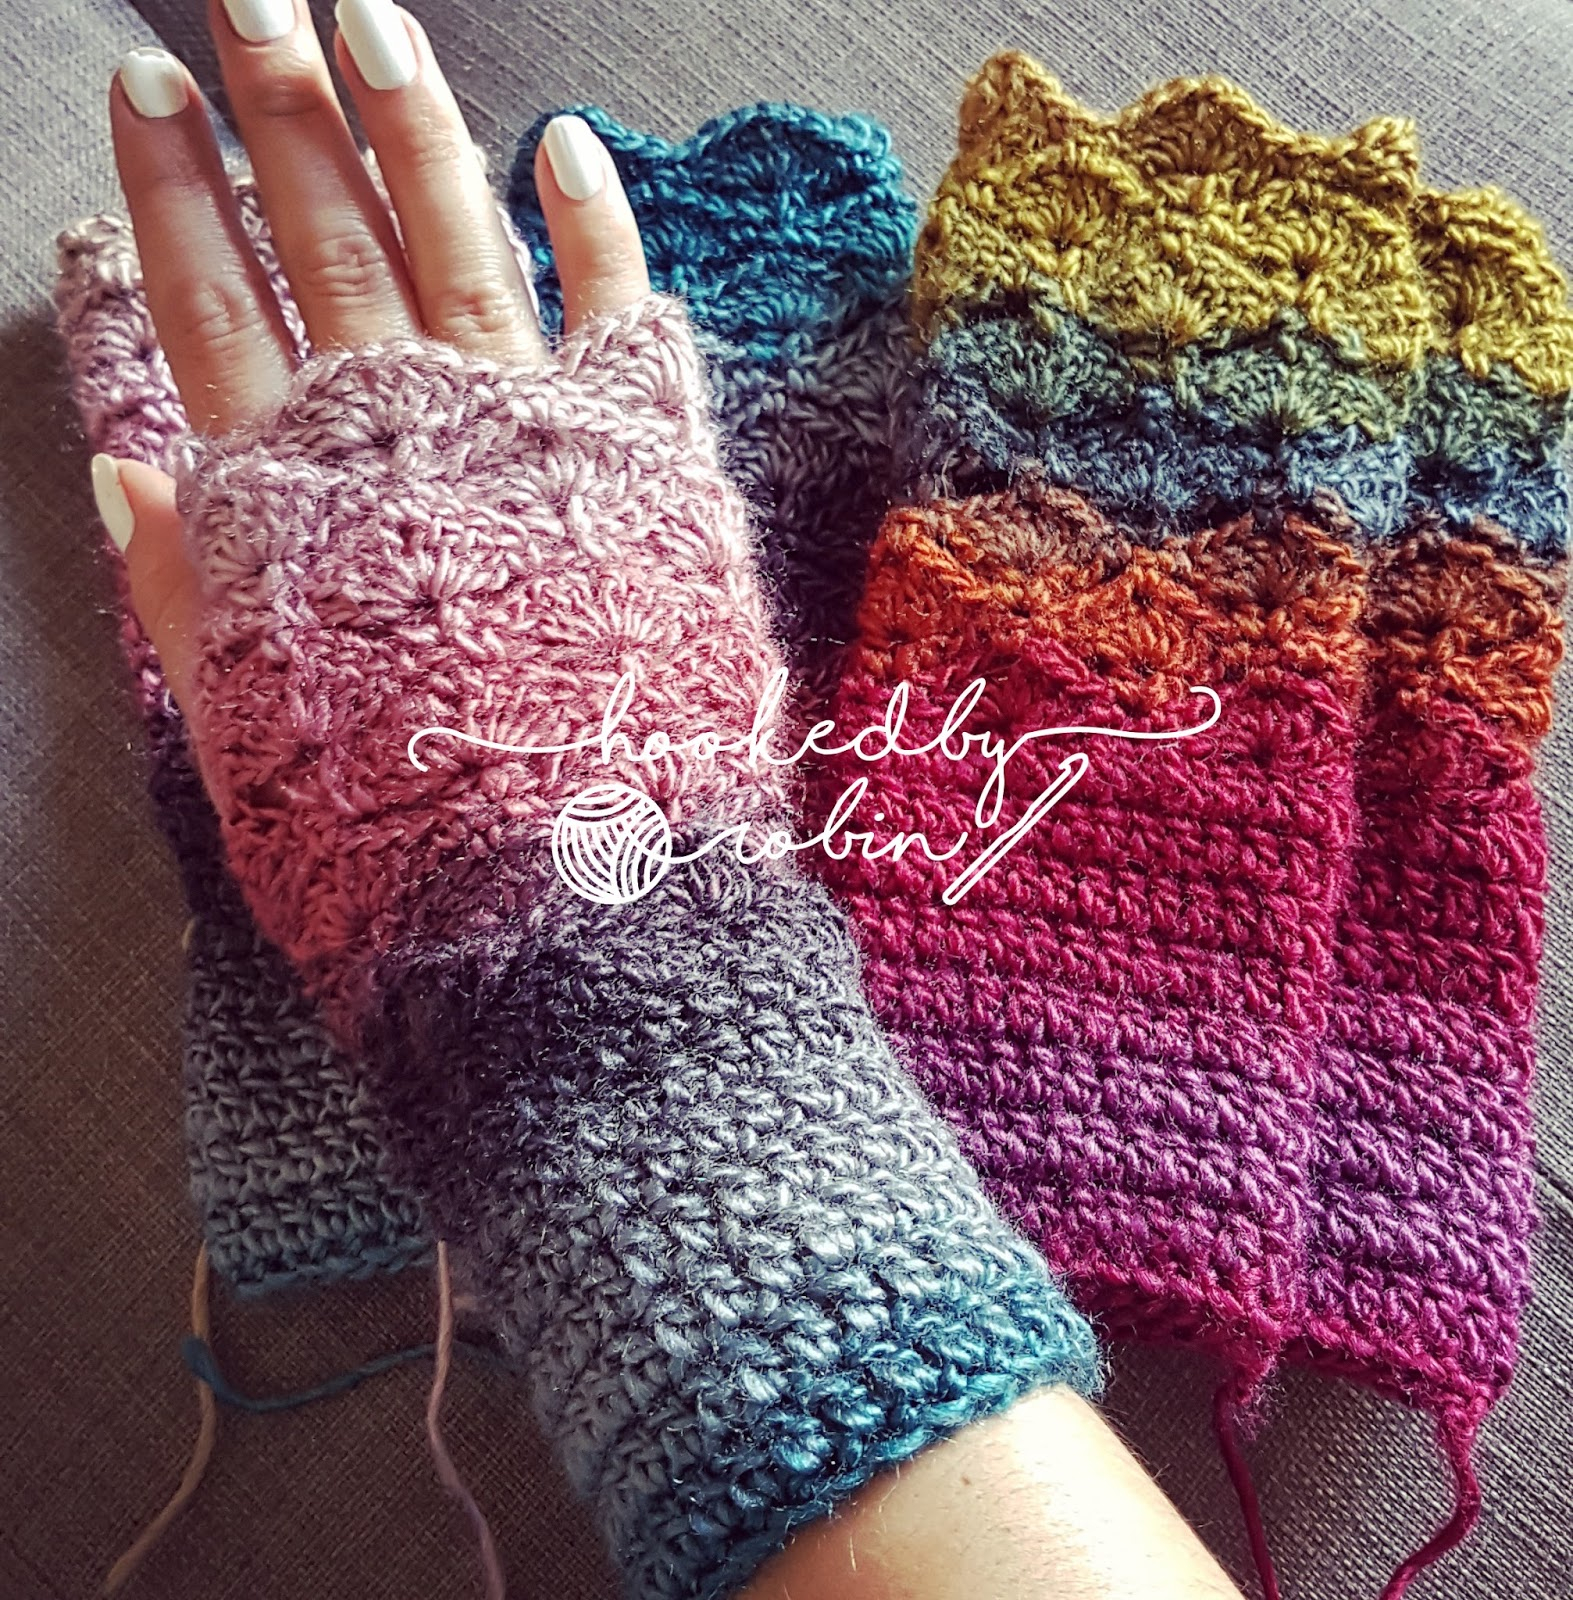 Crochet Gloves Pattern With Fingers Fantail Shell Stitch Fingerless Gloves Free Crochet Pattern